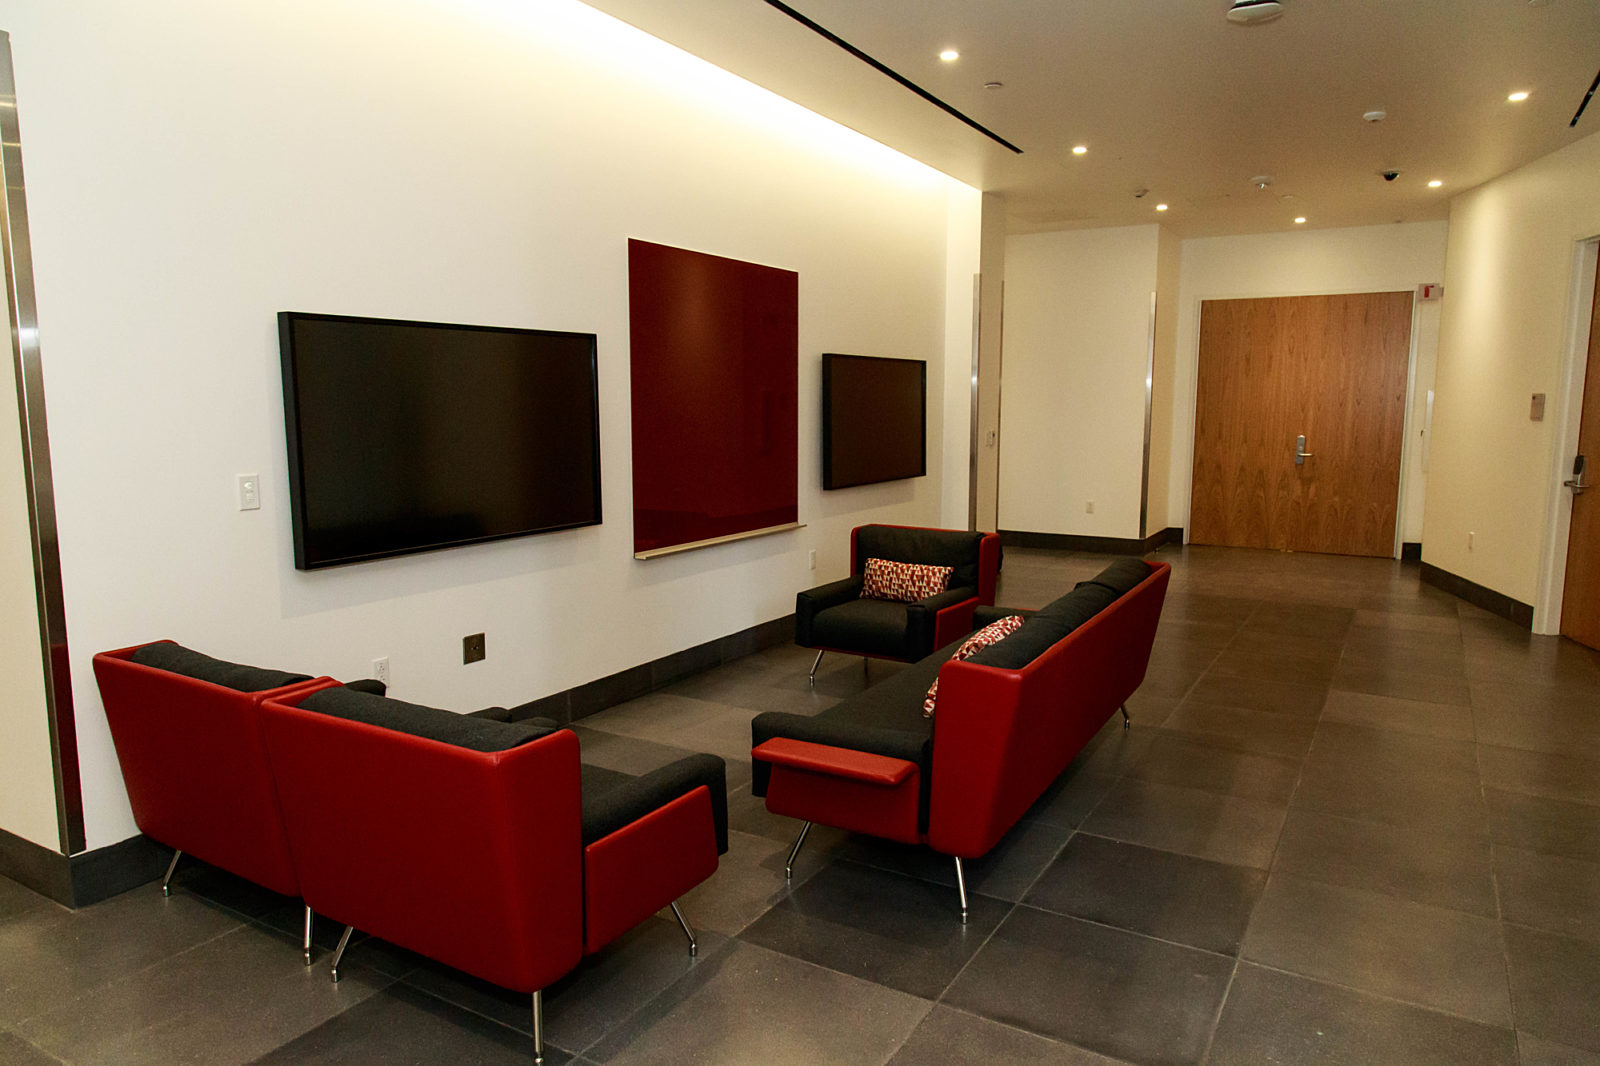 A lounge area with multiple lounge chairs and two televisions.